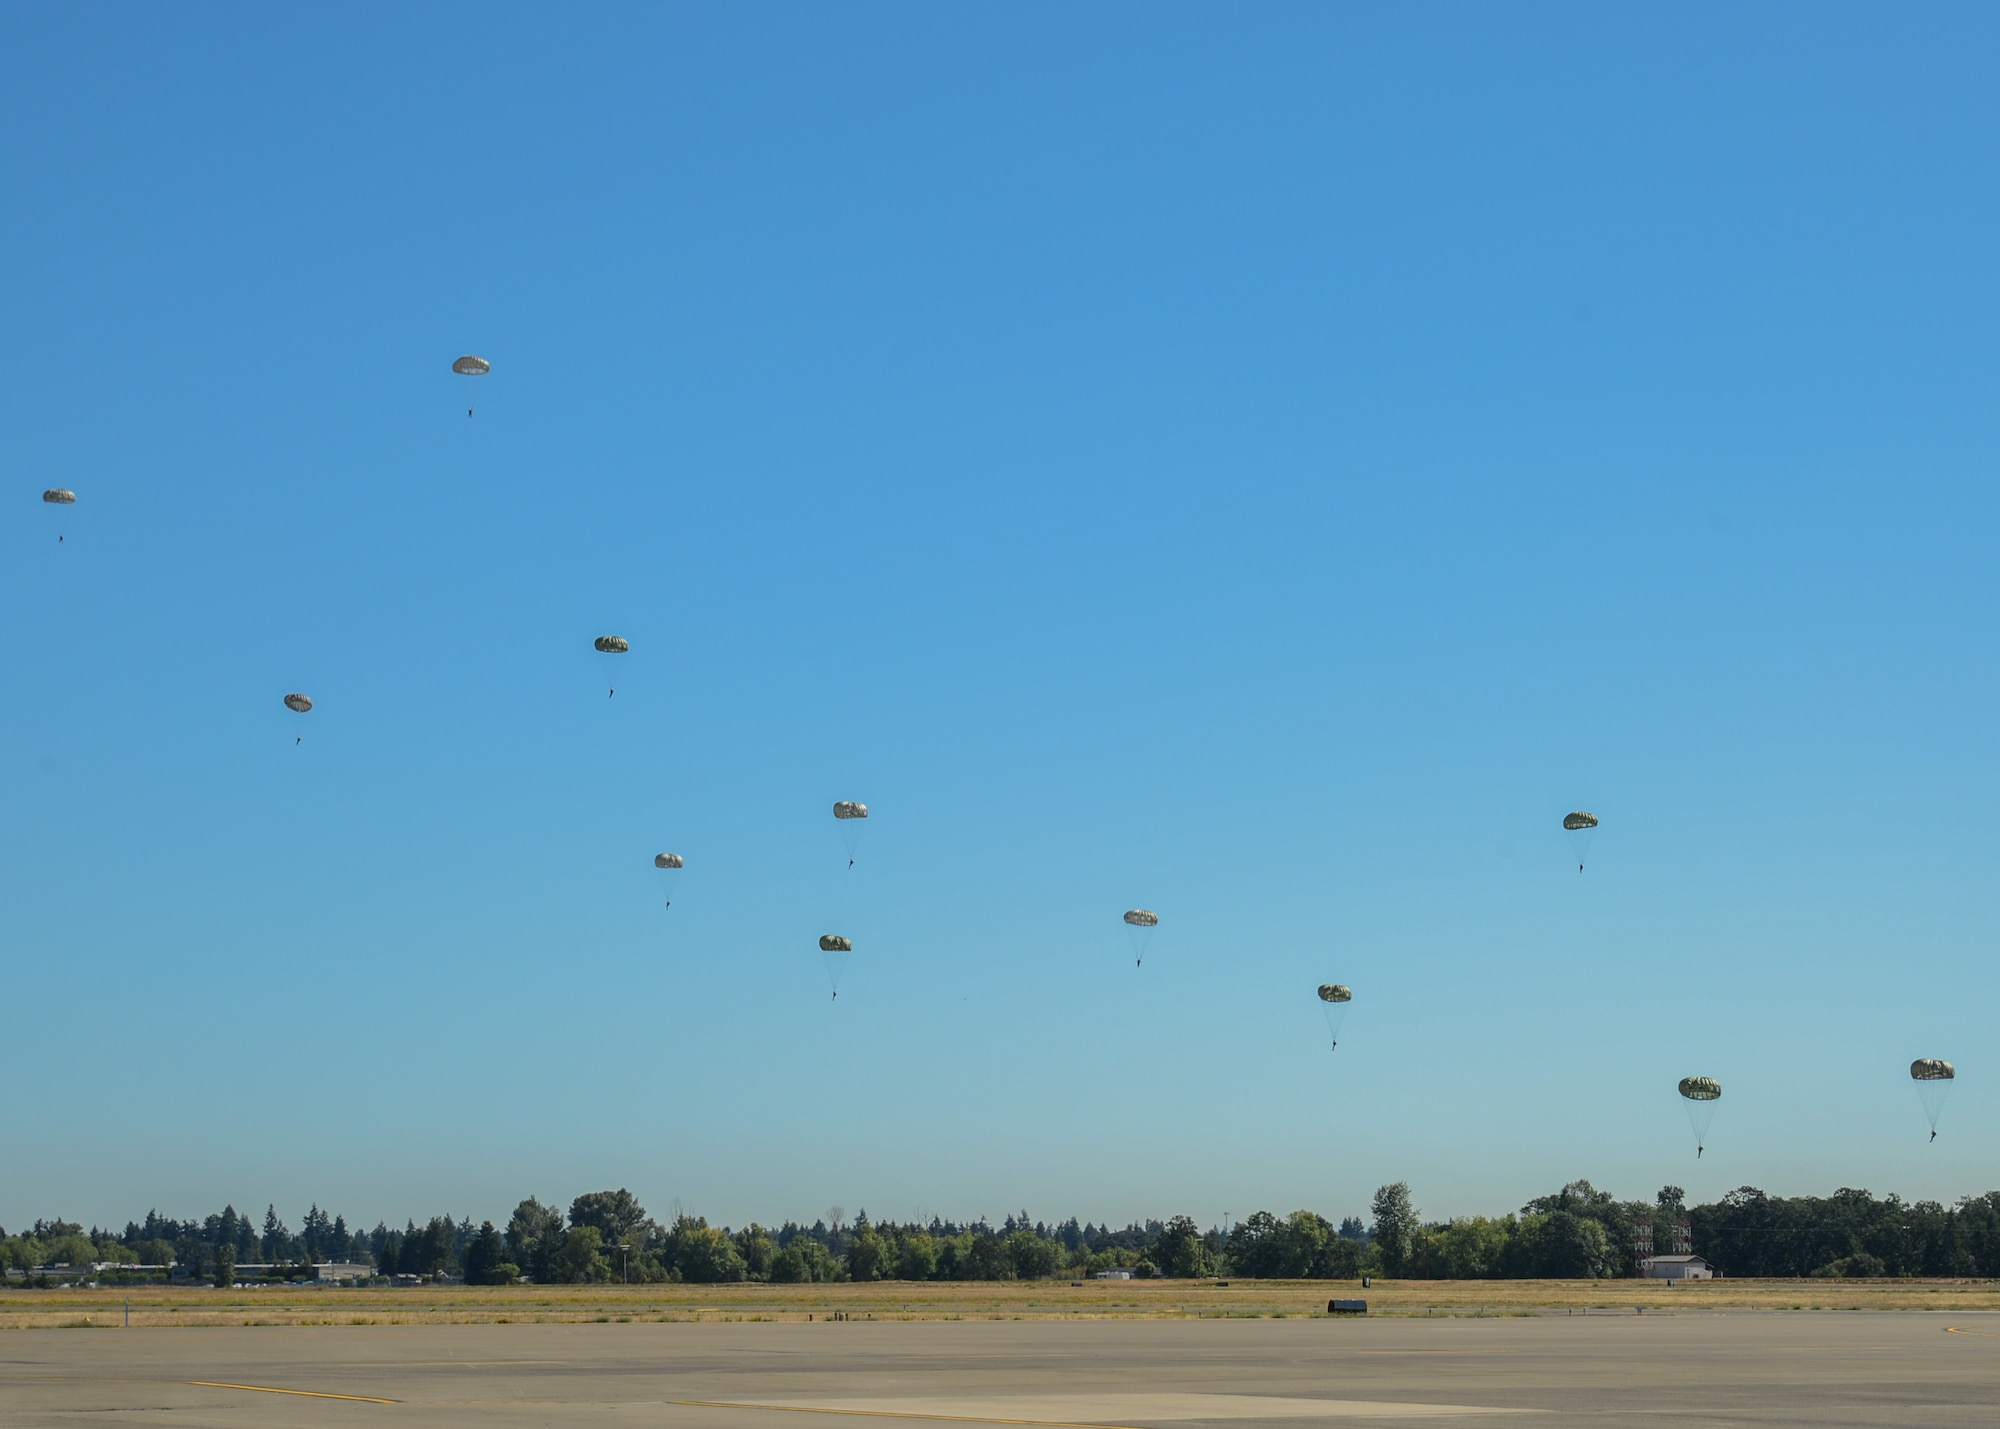 Airborne special operations soldiers with the 3rd Battalion, 1st Special Forces Group jump from a C-17 Globemaster III during a demonstration flight, July 26, 2019, at Joint Base Lewis-McChord, Wash. Team McChord honored the 20th anniversary of the first C-17 delivered to McChord Field, Washington, with a rededication ceremony. (U.S. Air Force photo by Staff Sgt. Joshua Smoot)